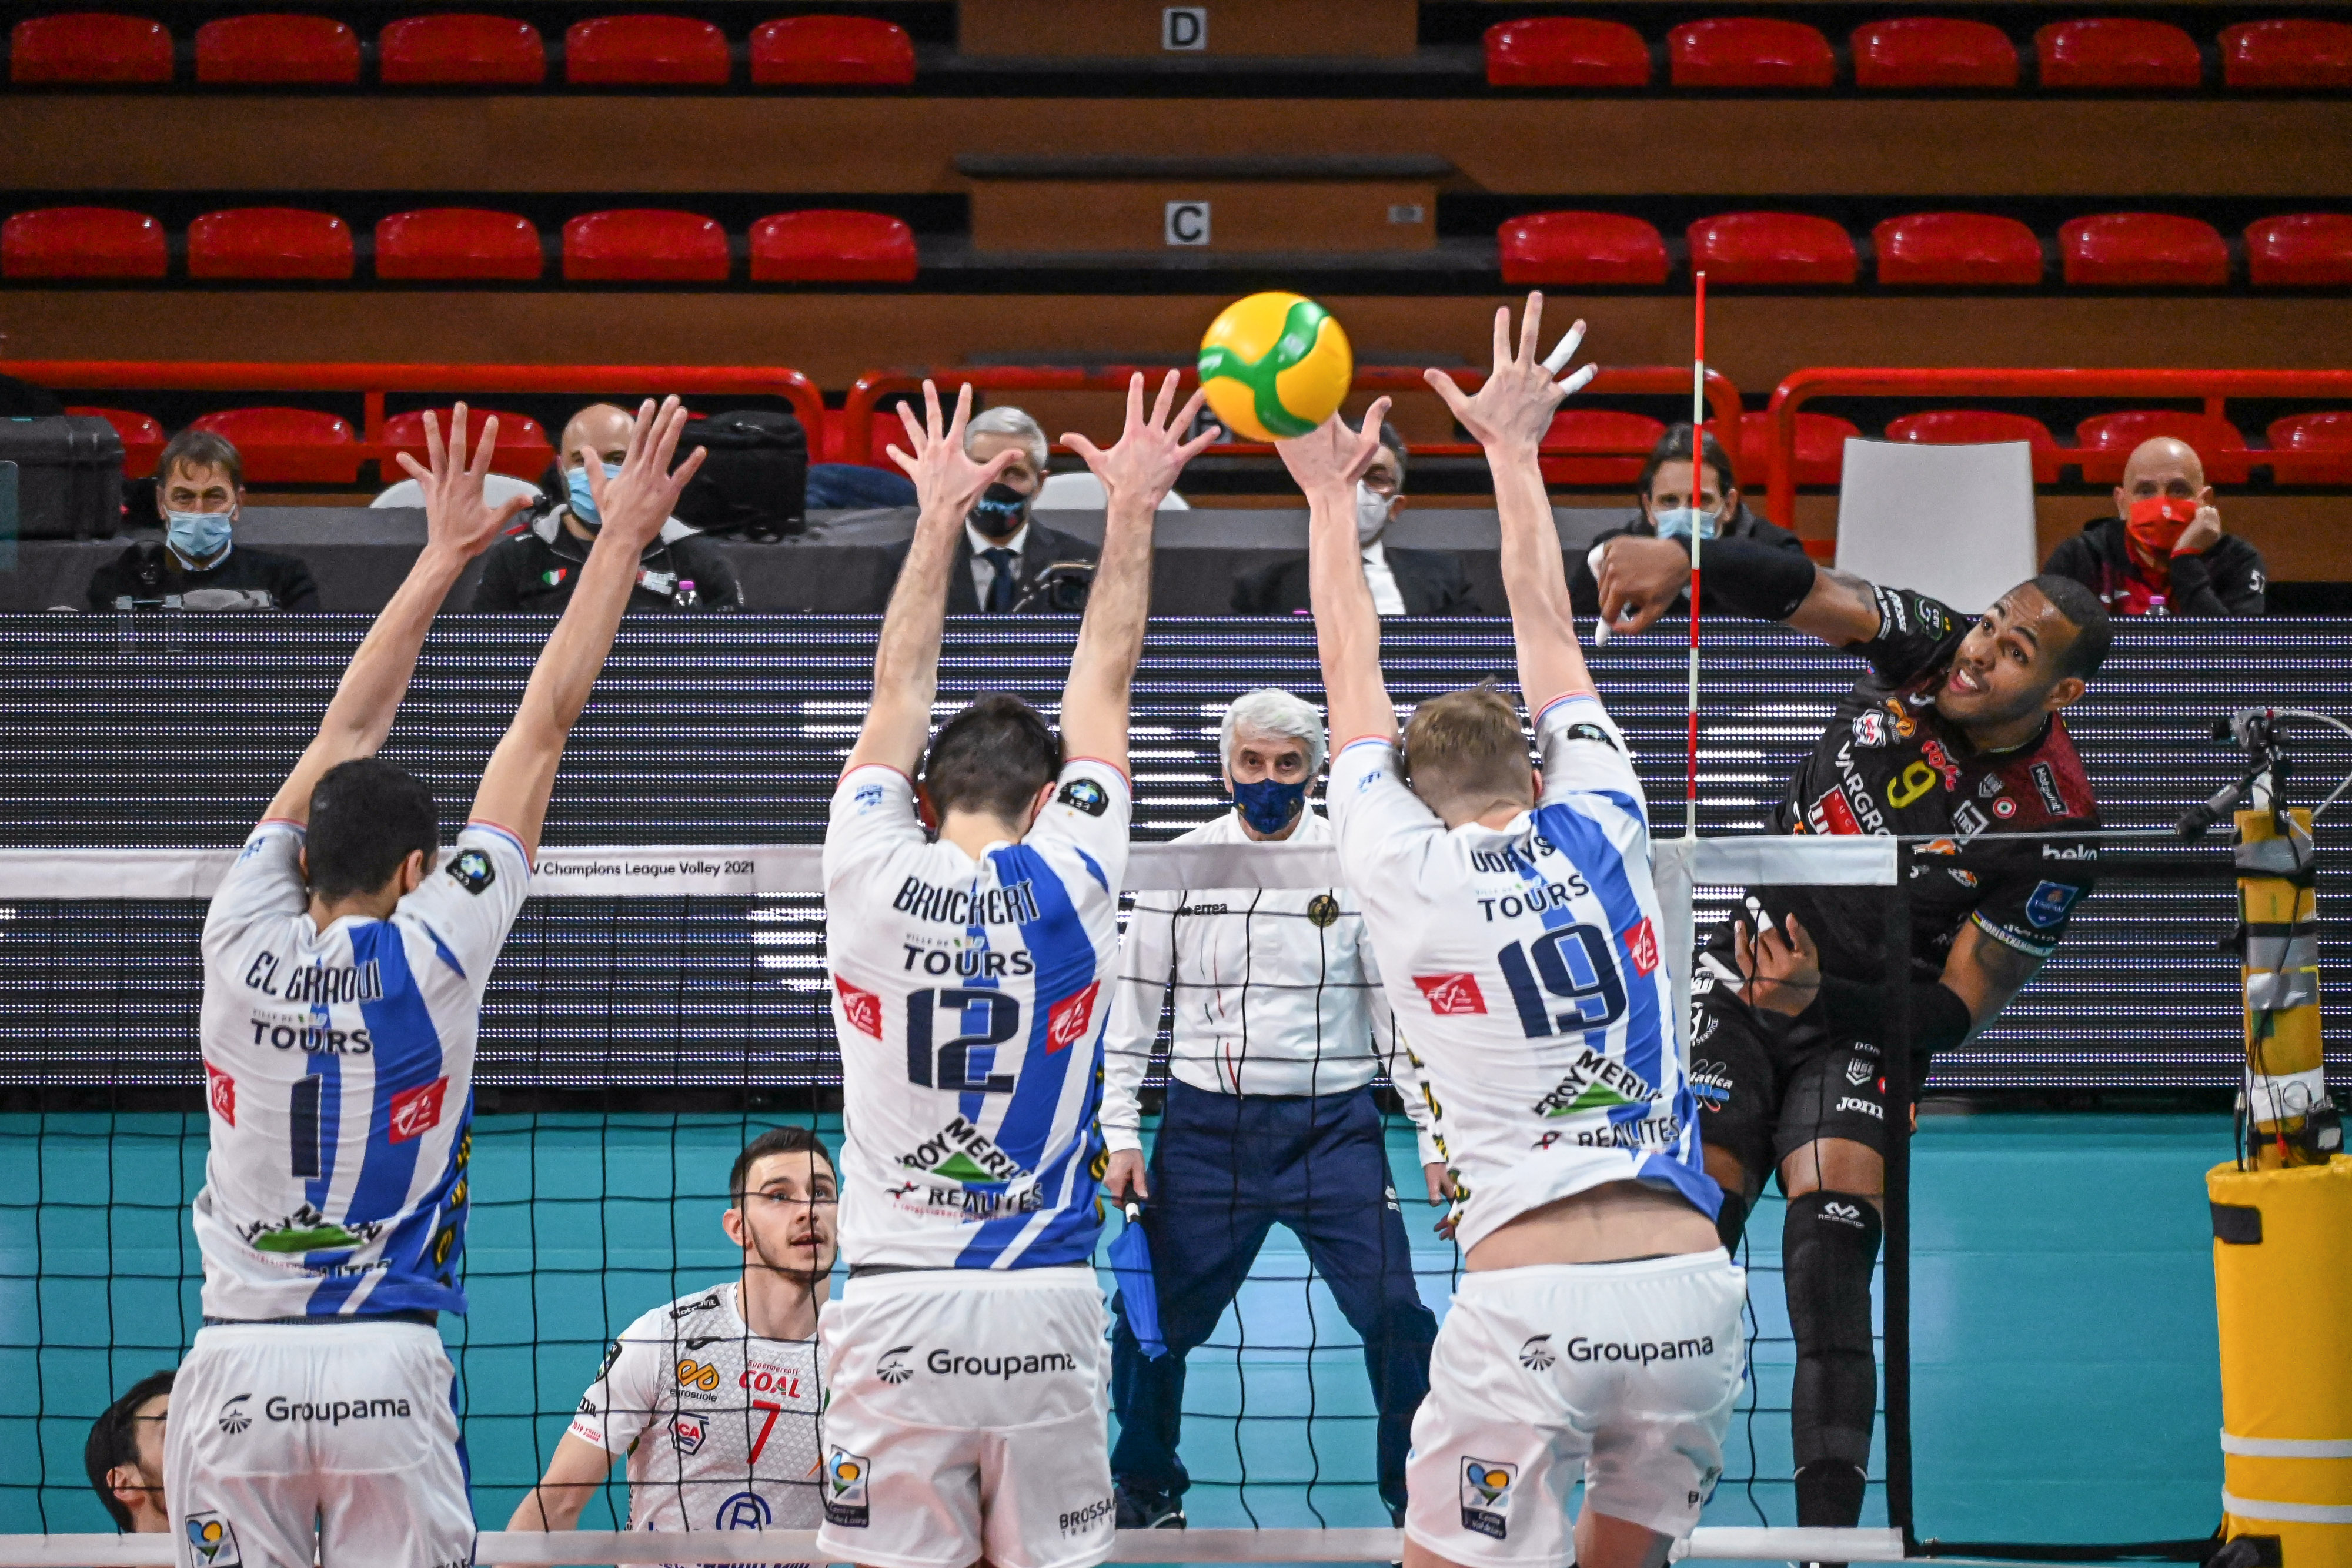 Italian duel sees both Perugia and Lube advance | ChampionsLeague